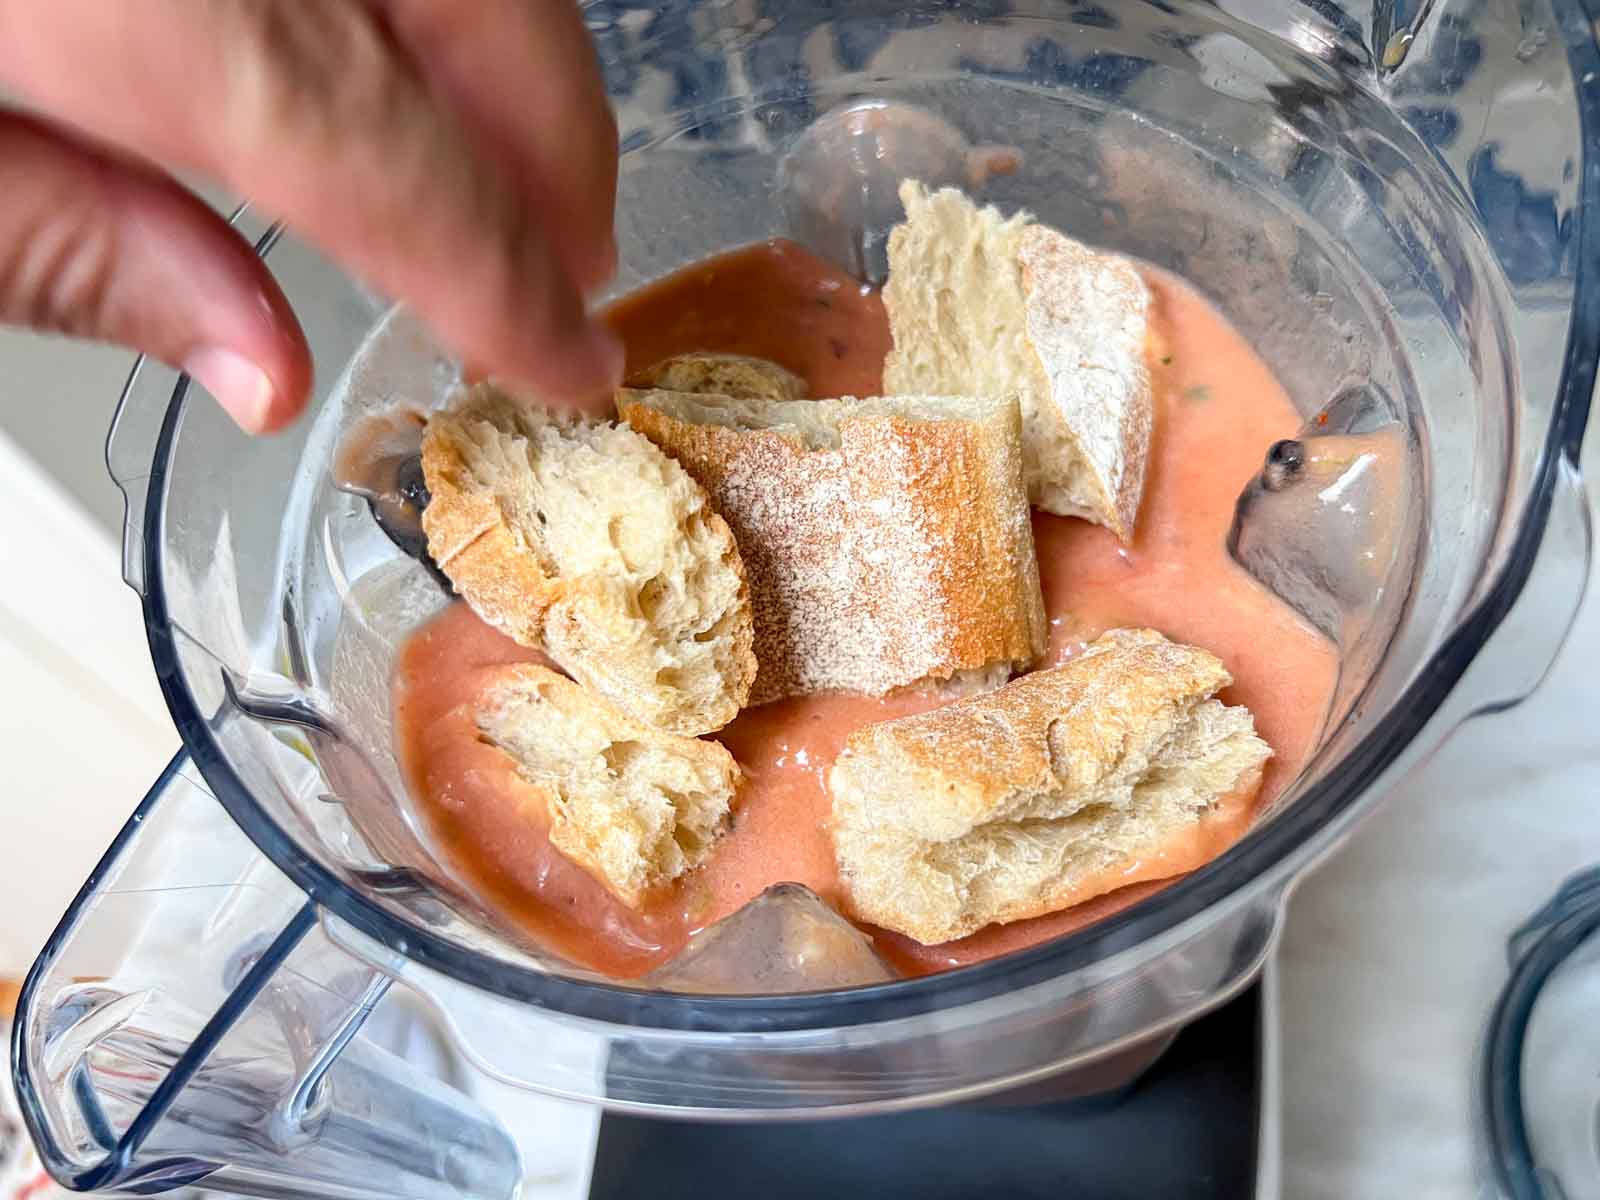 Placing stale bread in a blender for gazpacho